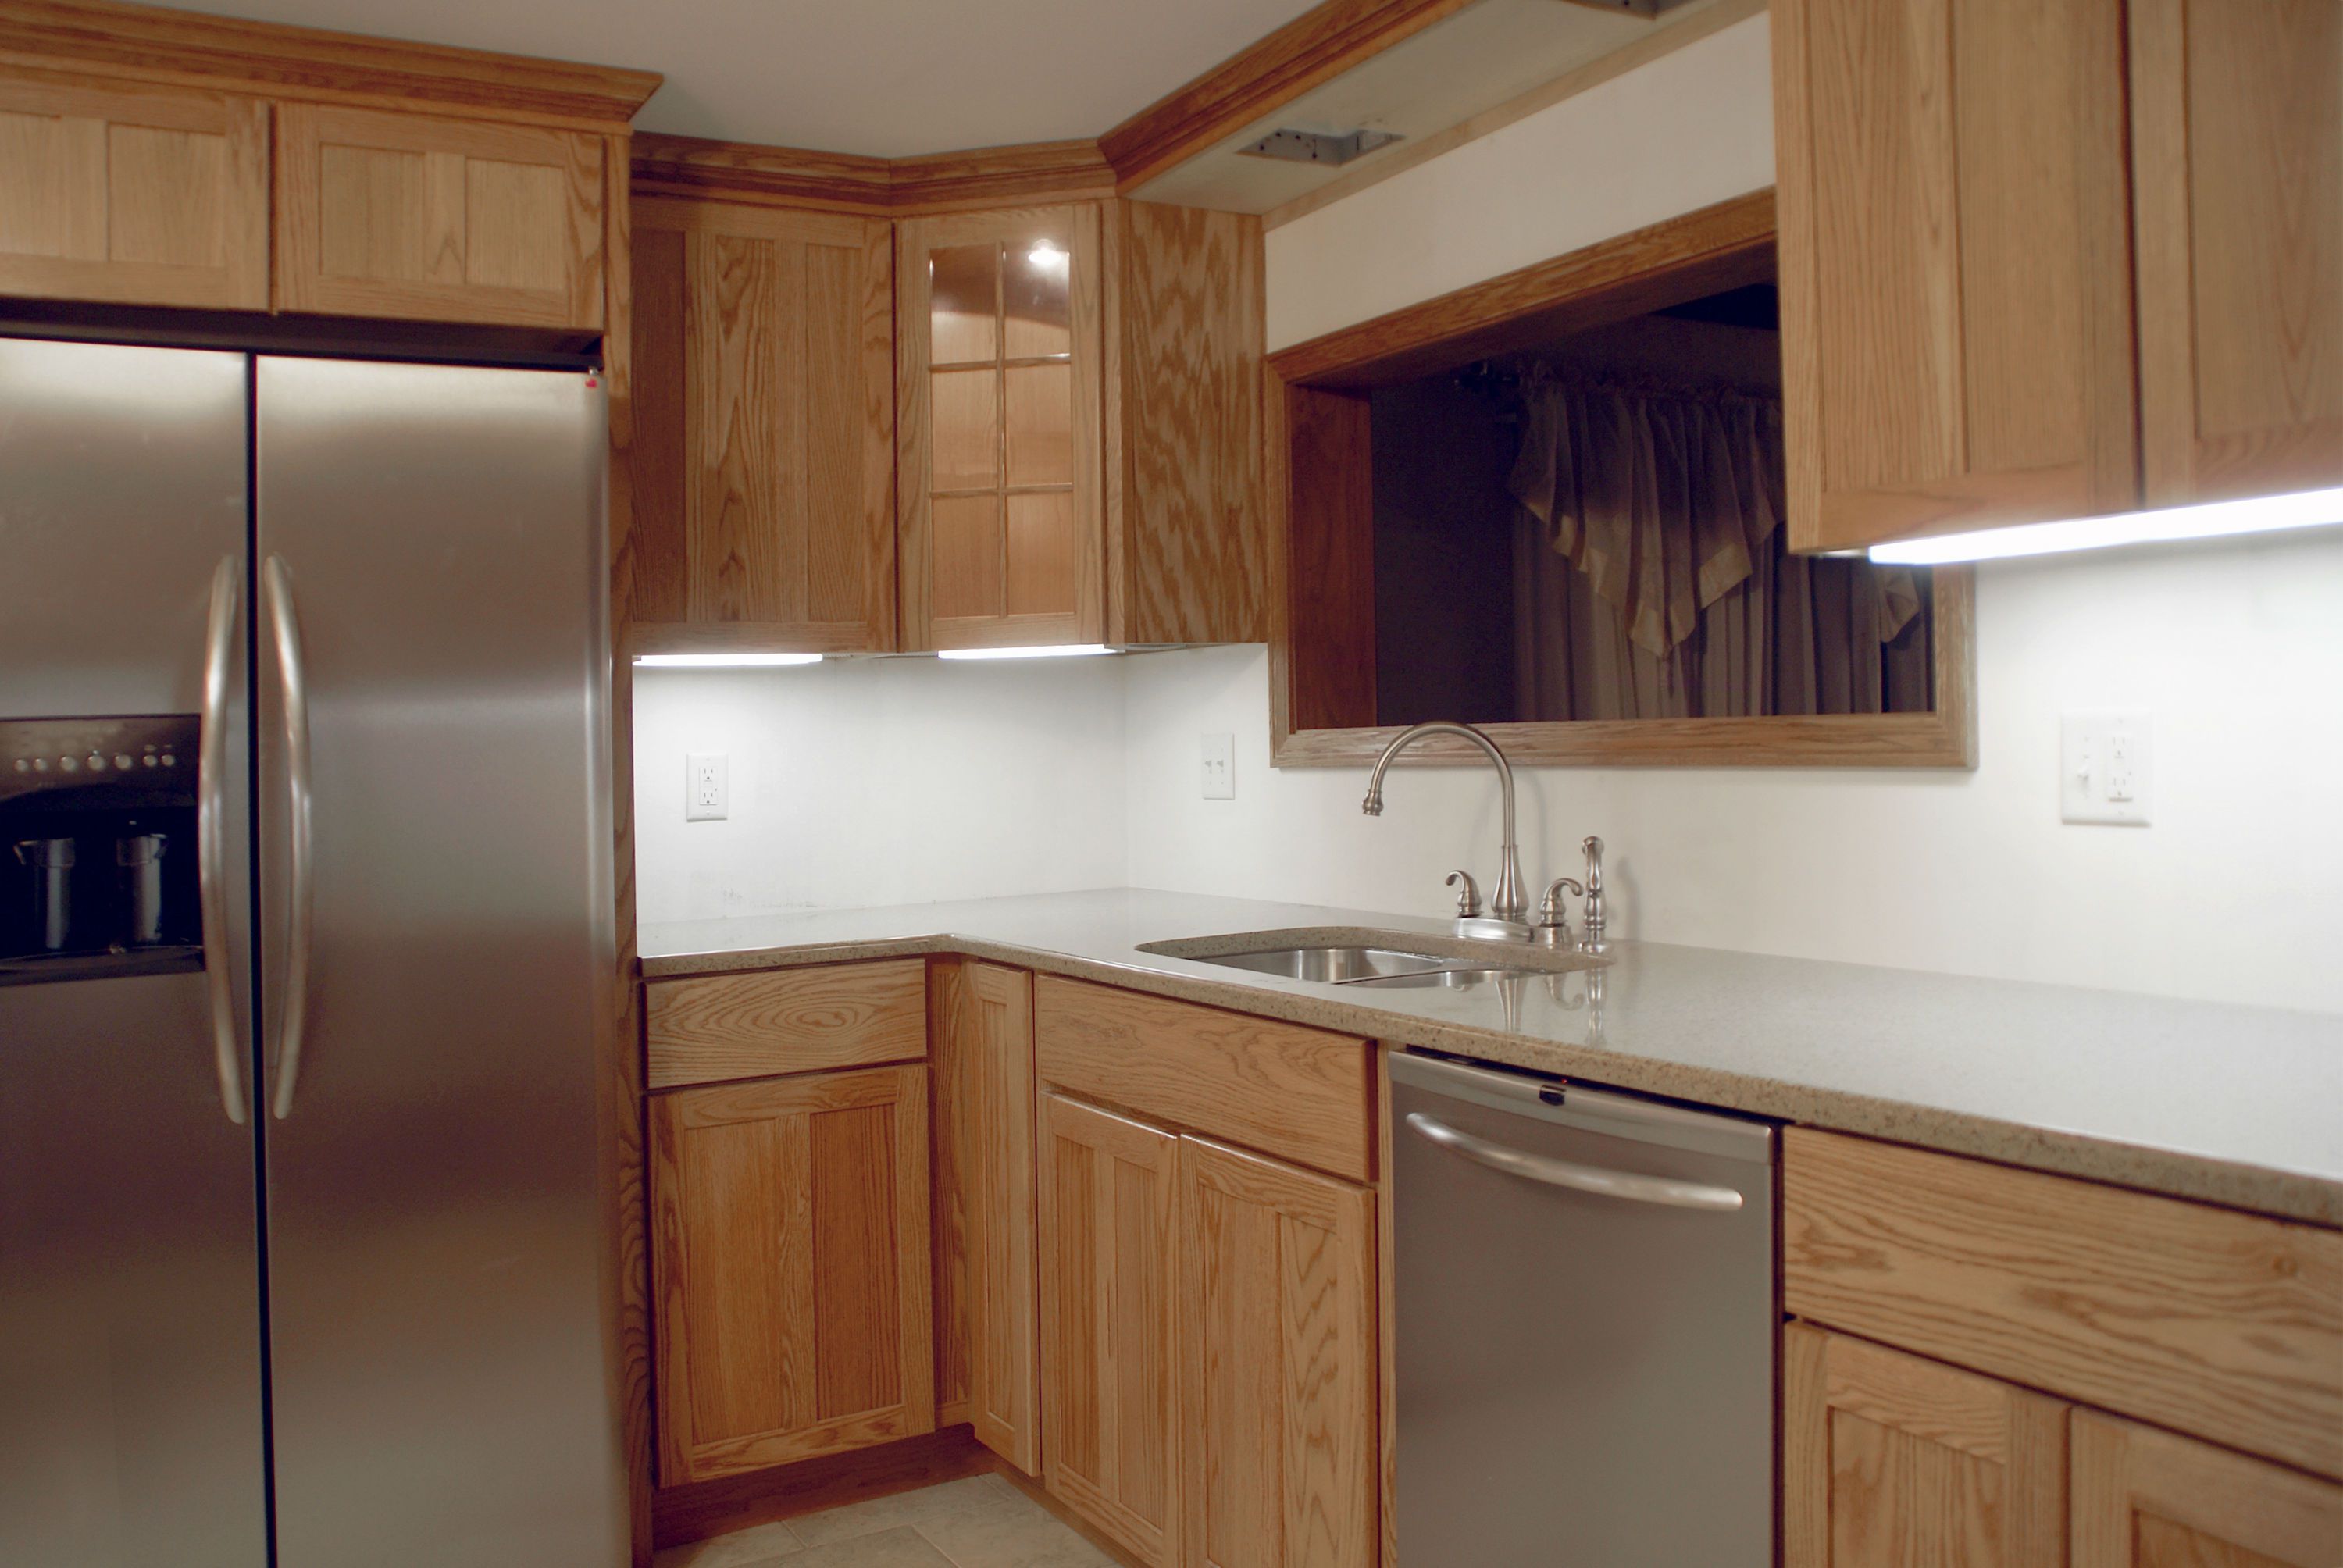 Before You Buy RTA Kitchen Cabinets